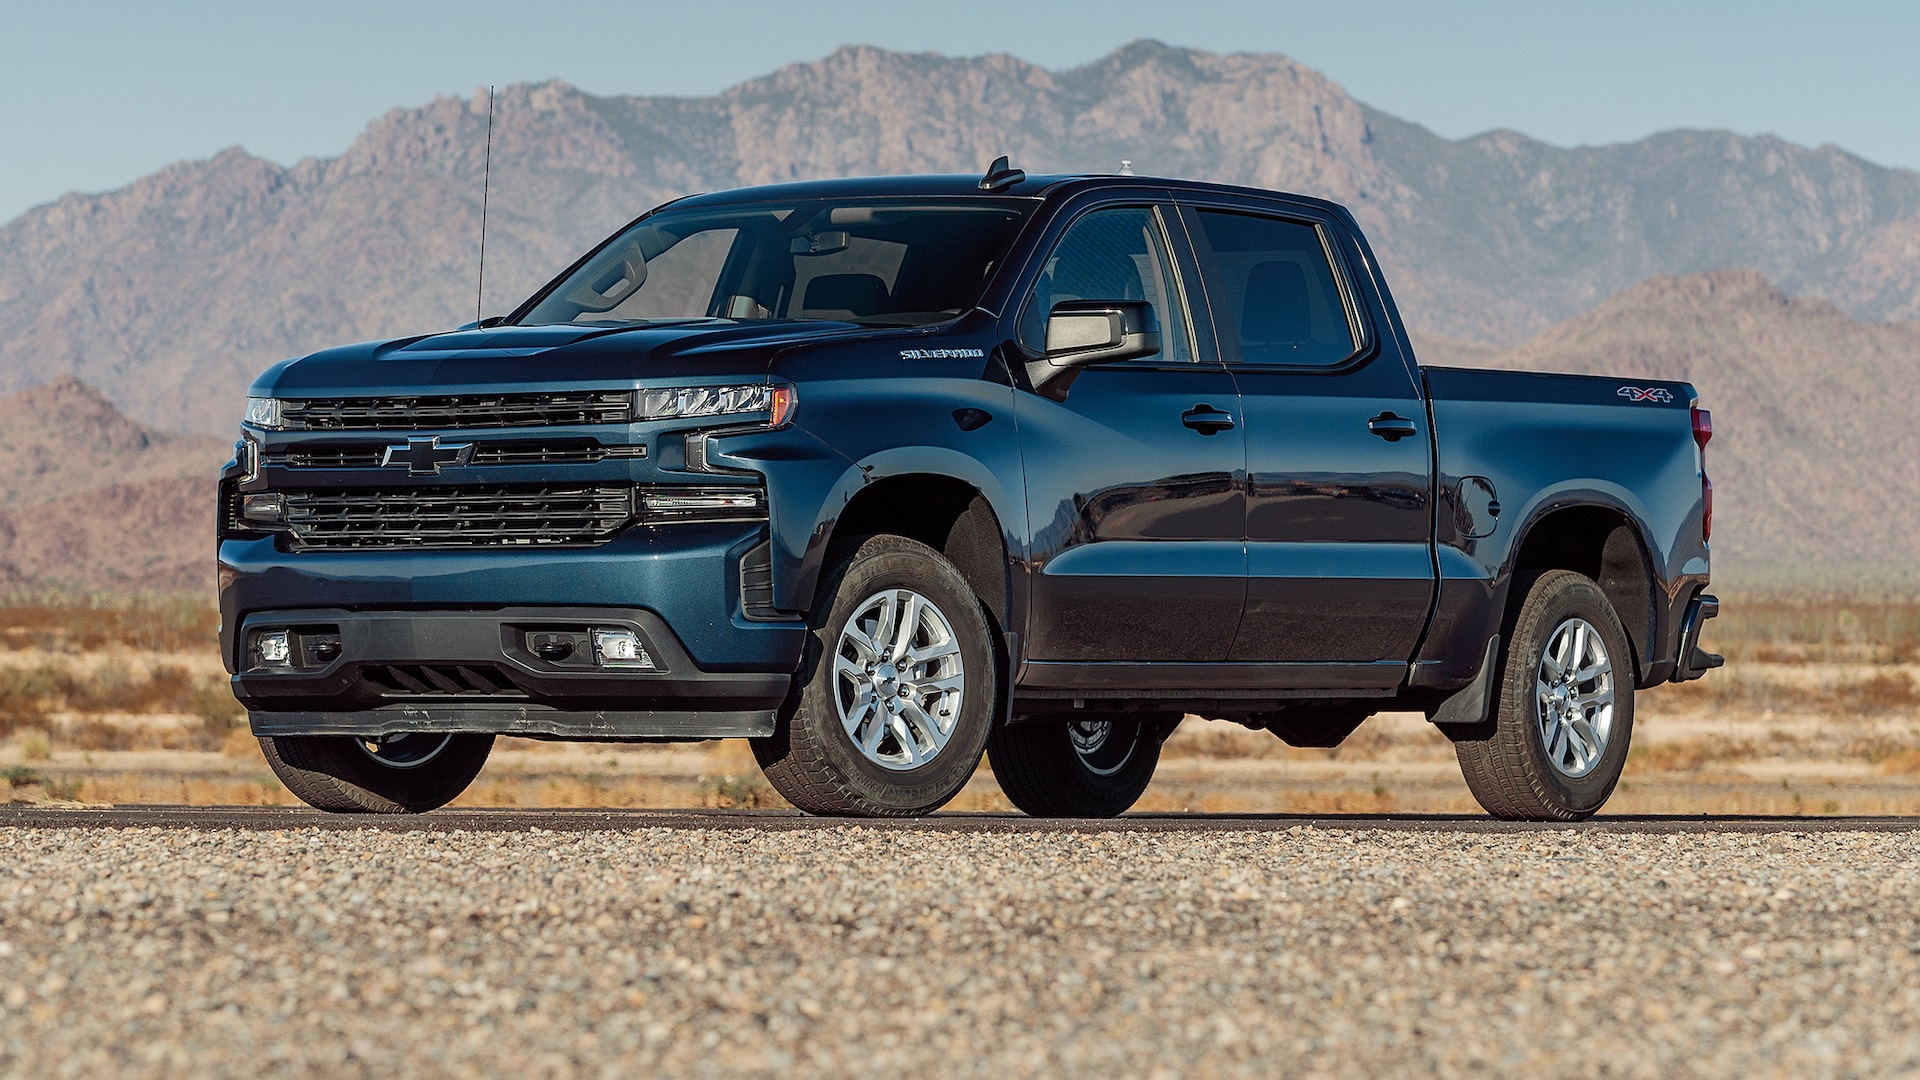 2020 Chevrolet Silverado 1500 Four-Cylinder First Test: Quicker Than Some  V-6s